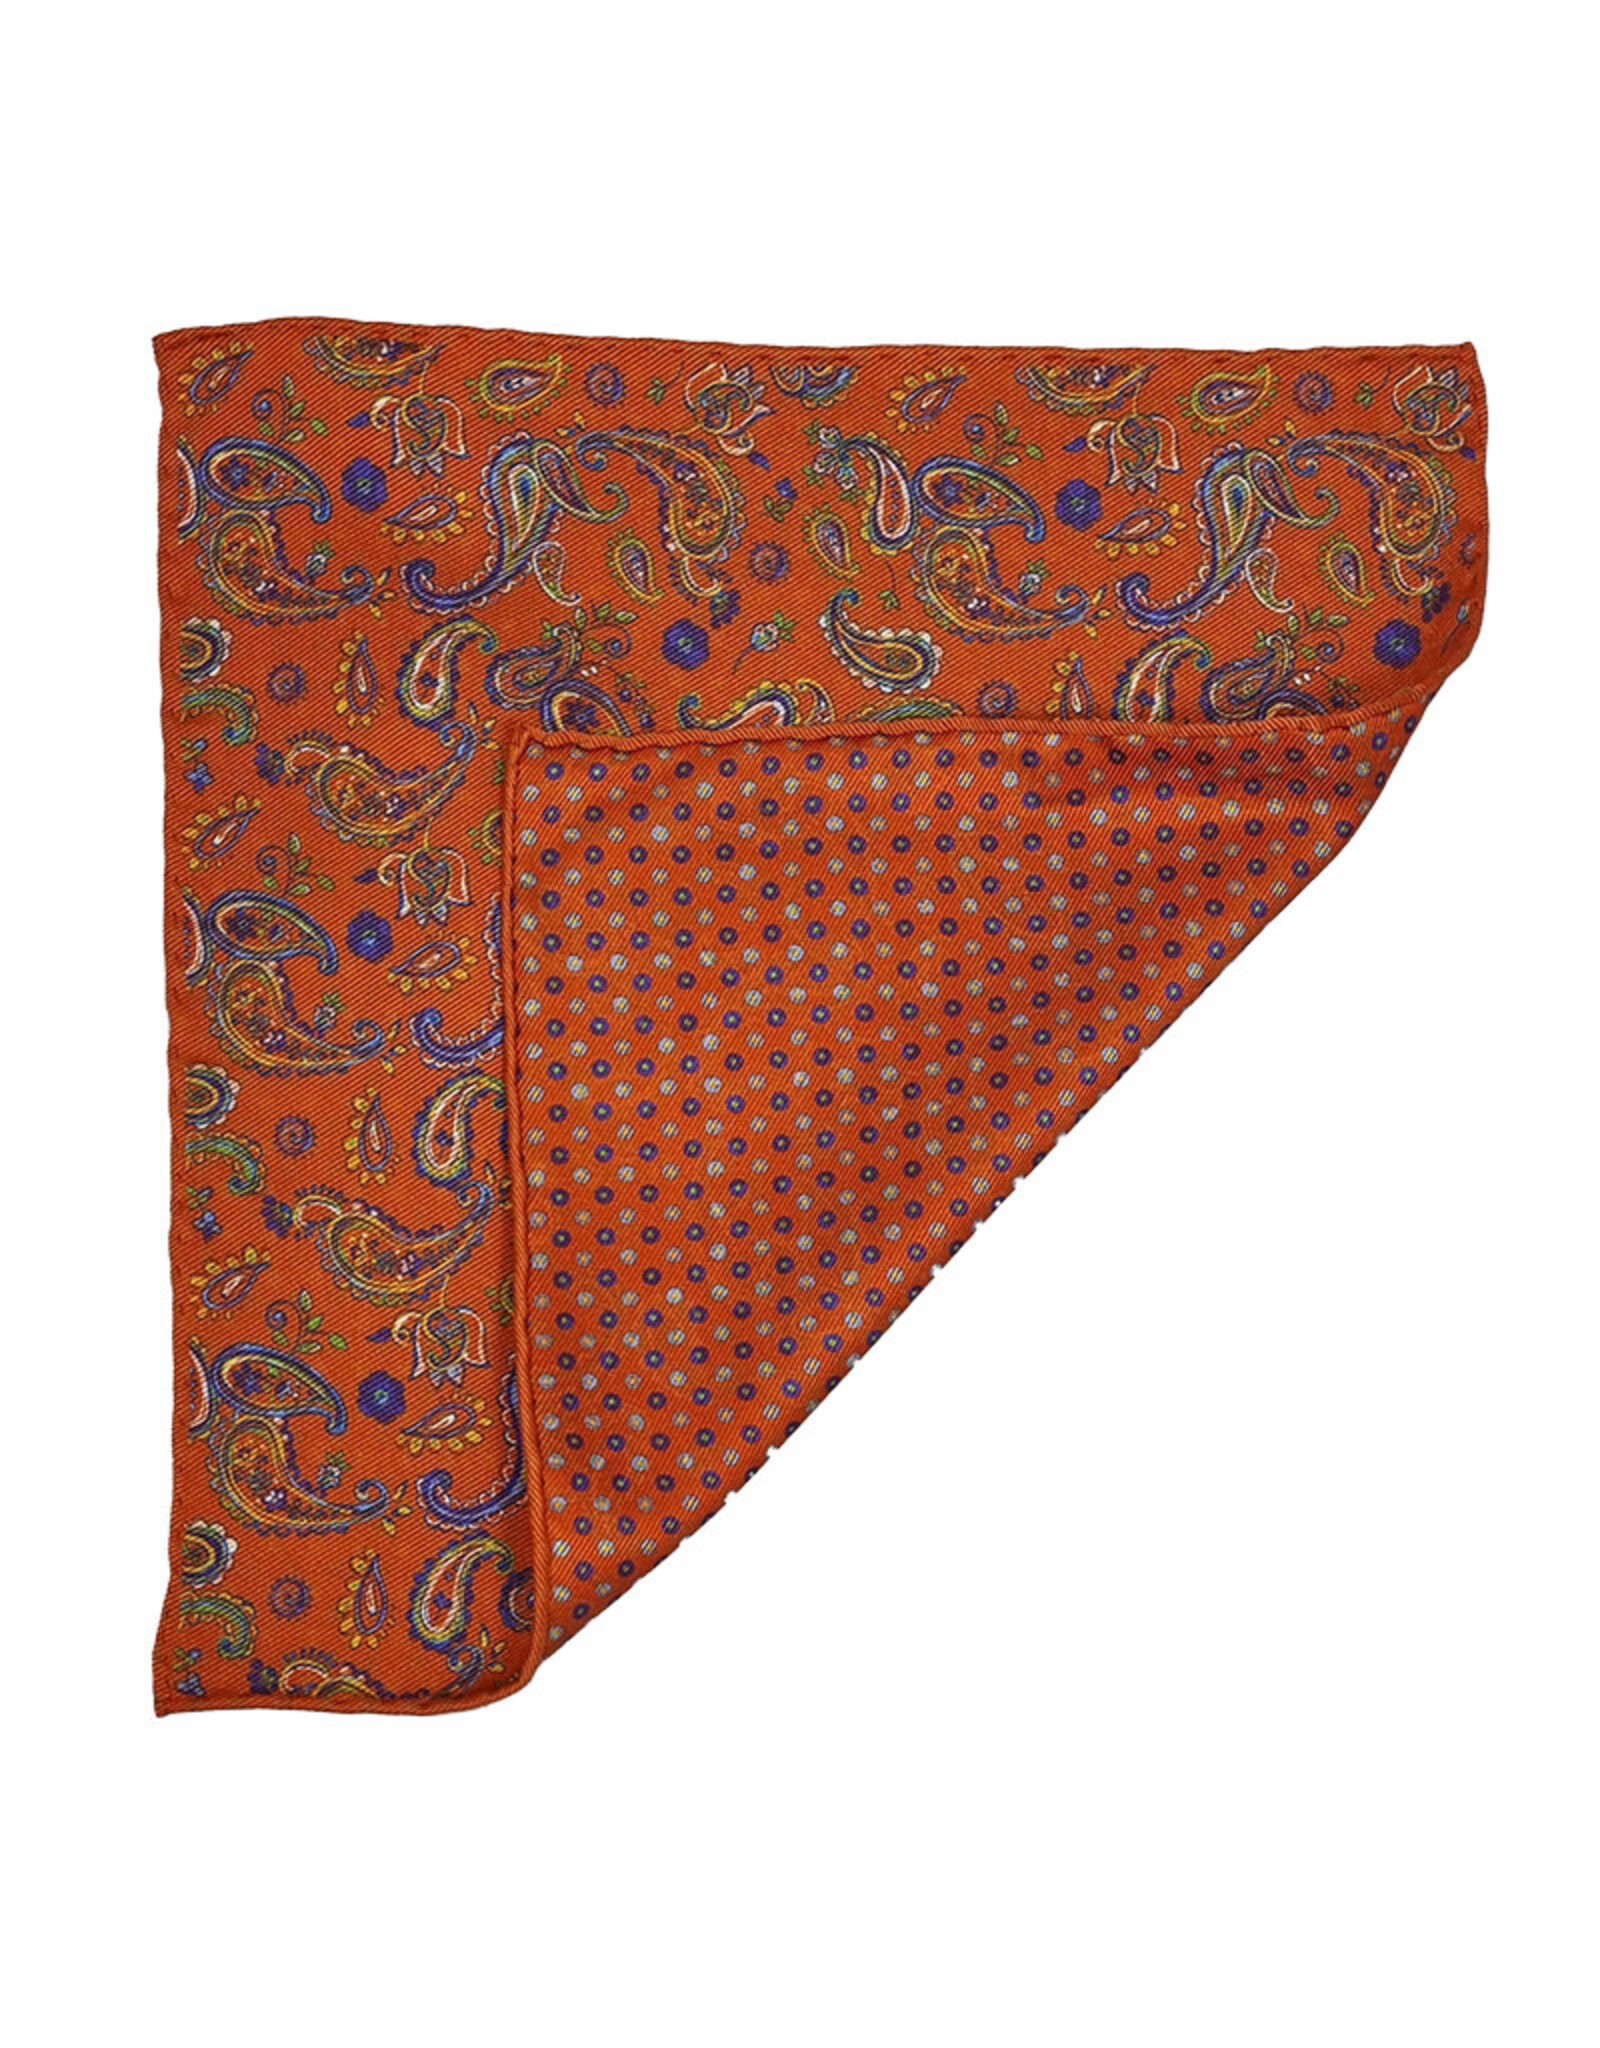 Calabrese Calabrese pocket square paisley orange 8024014/016